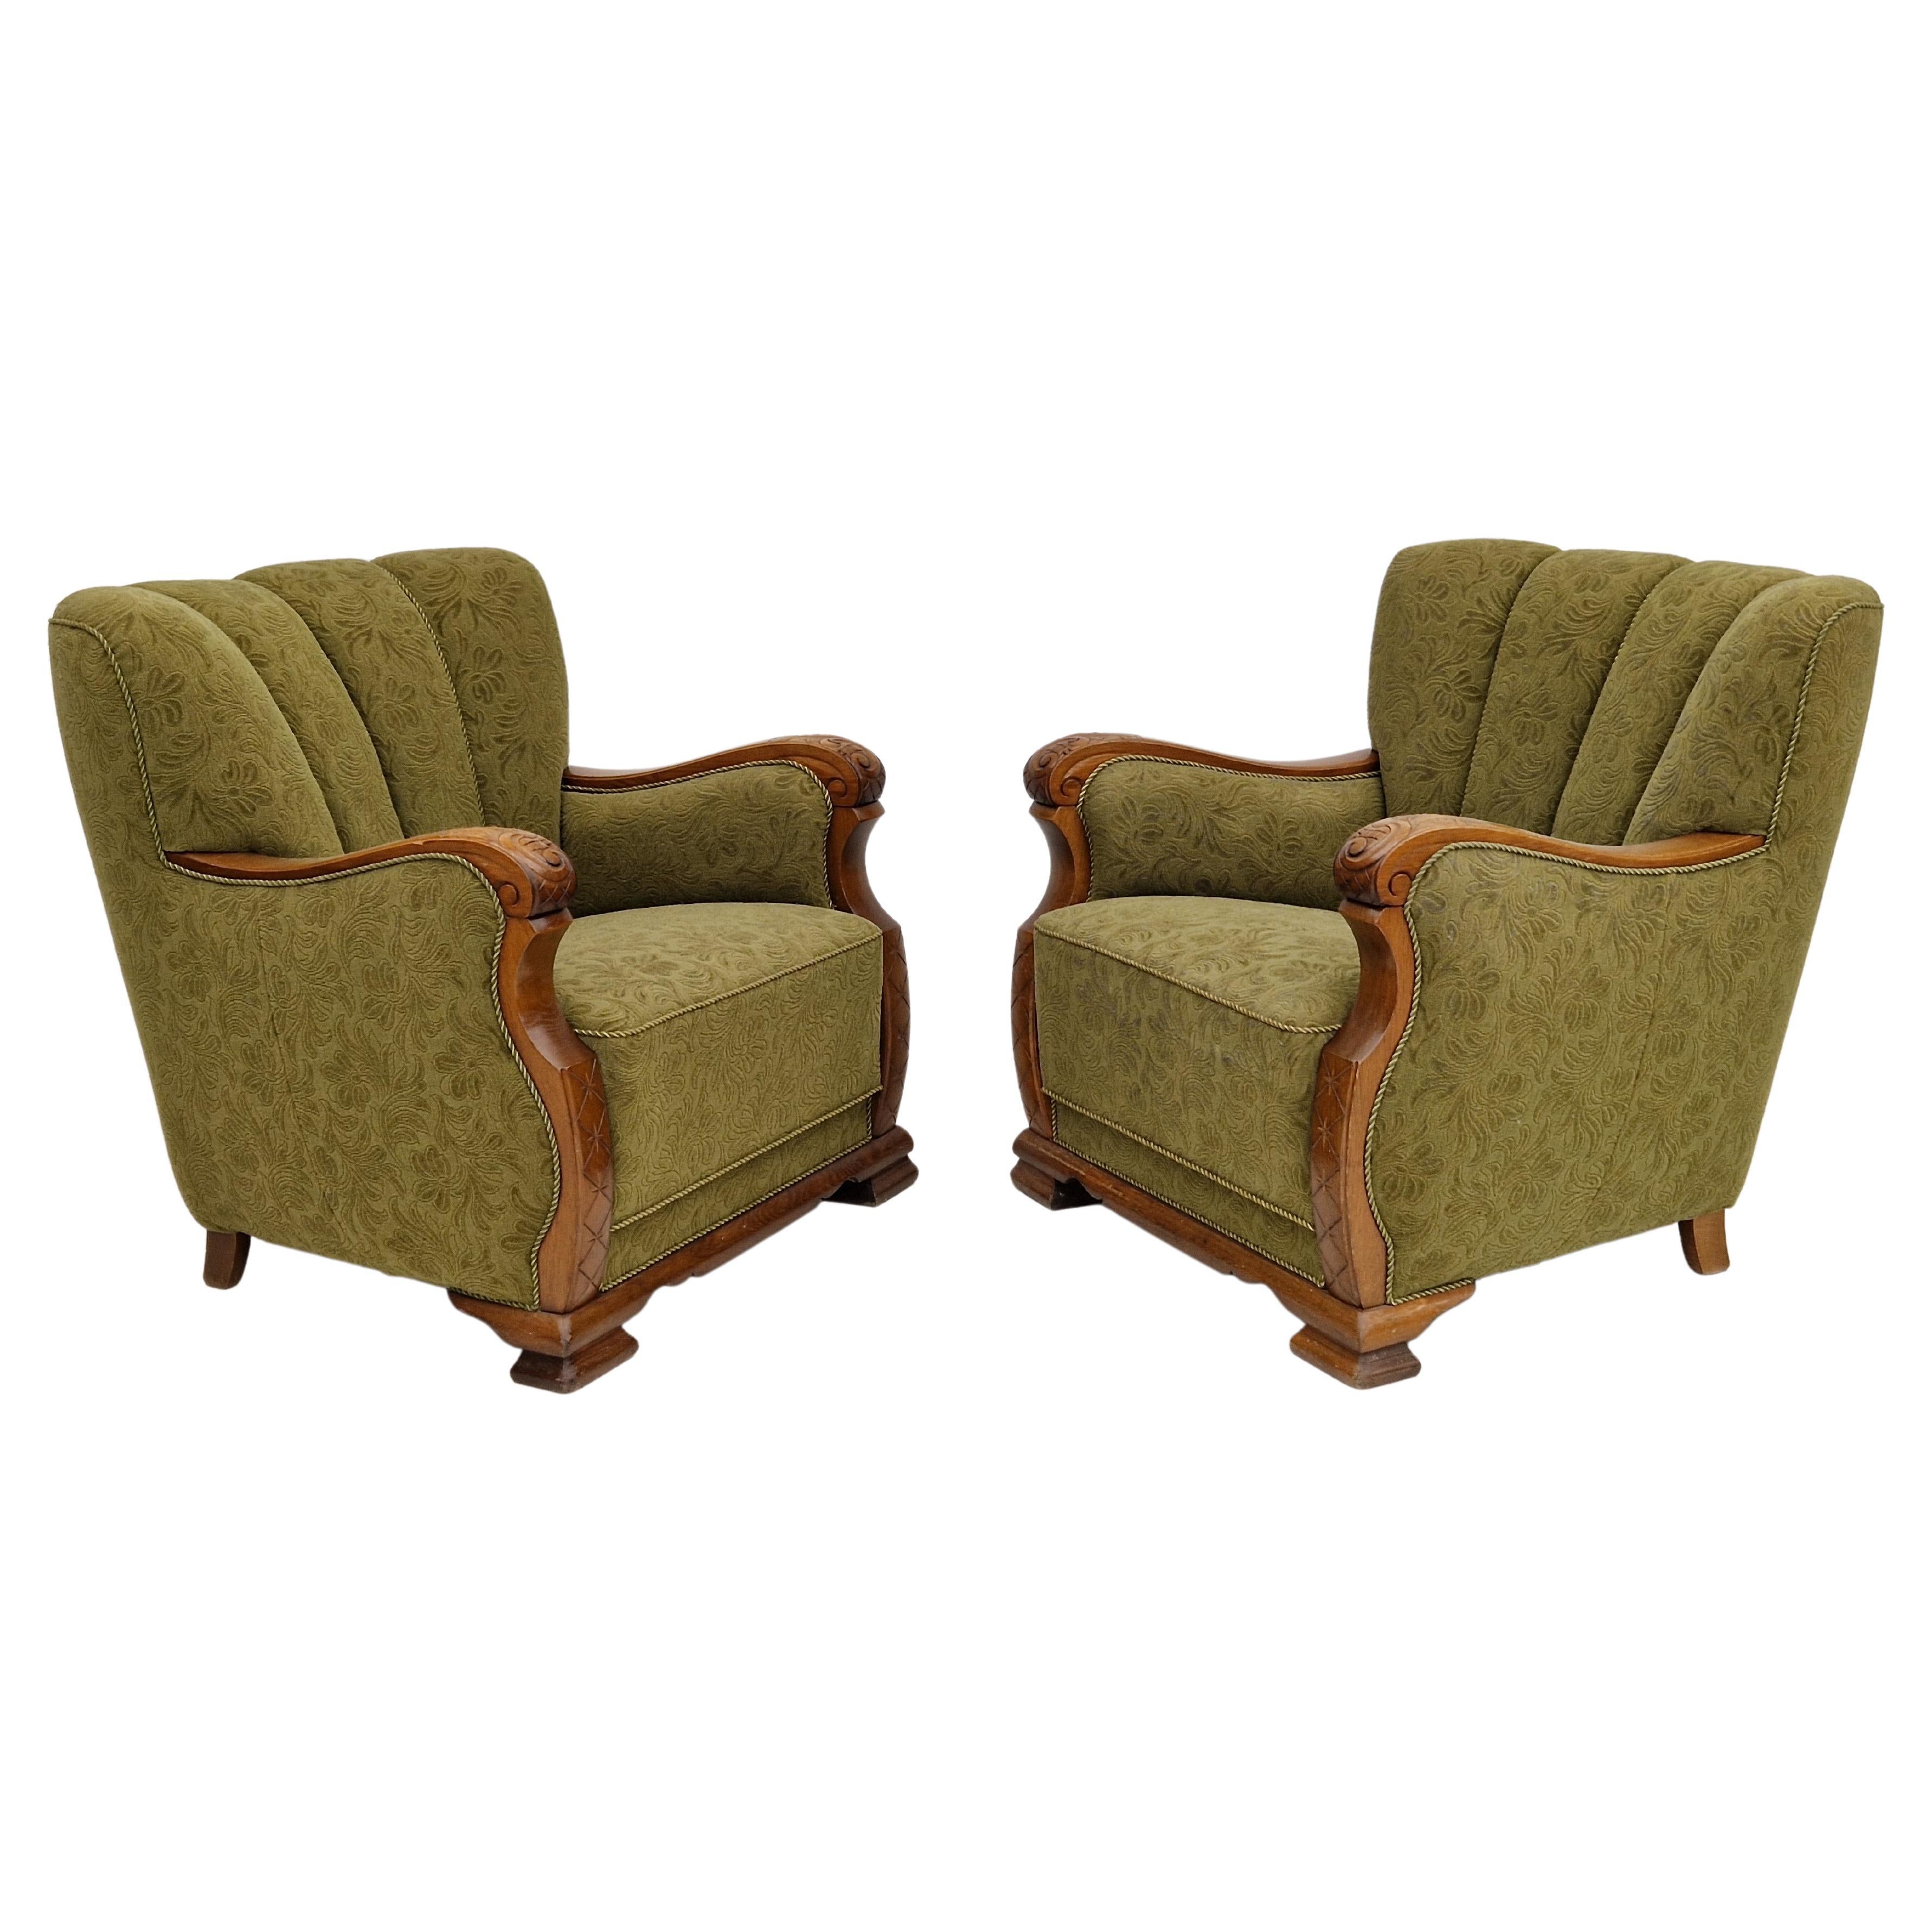 1950s, Pair of Vintage Danish Armchairs, Original Very Good Condition For Sale